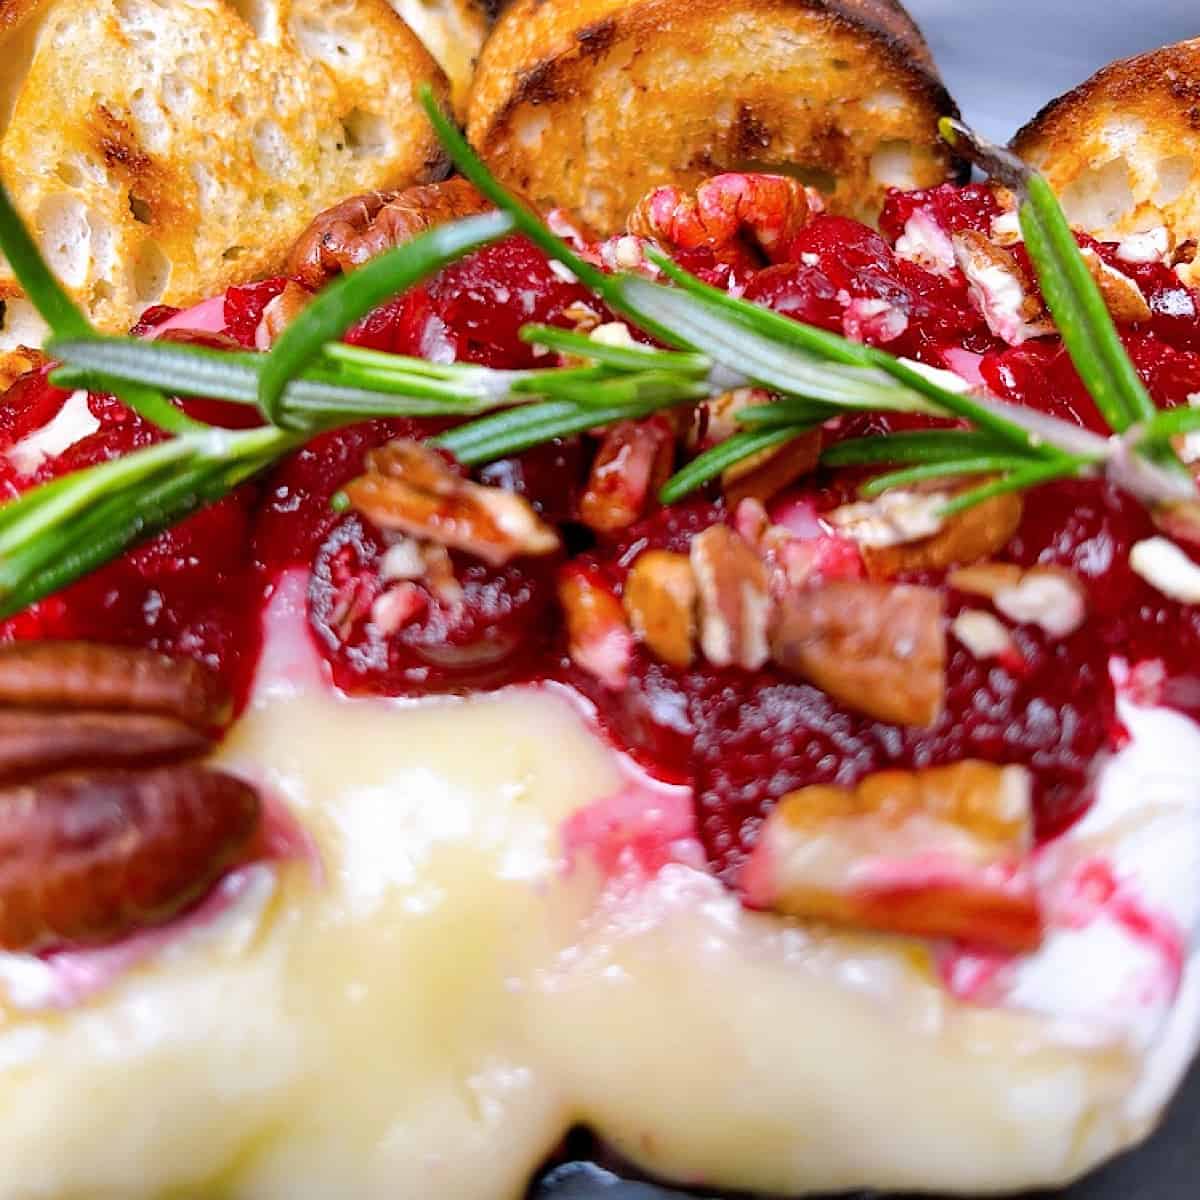 Baked Brie with cranberry sauce and chopped pecans topped with rosemary